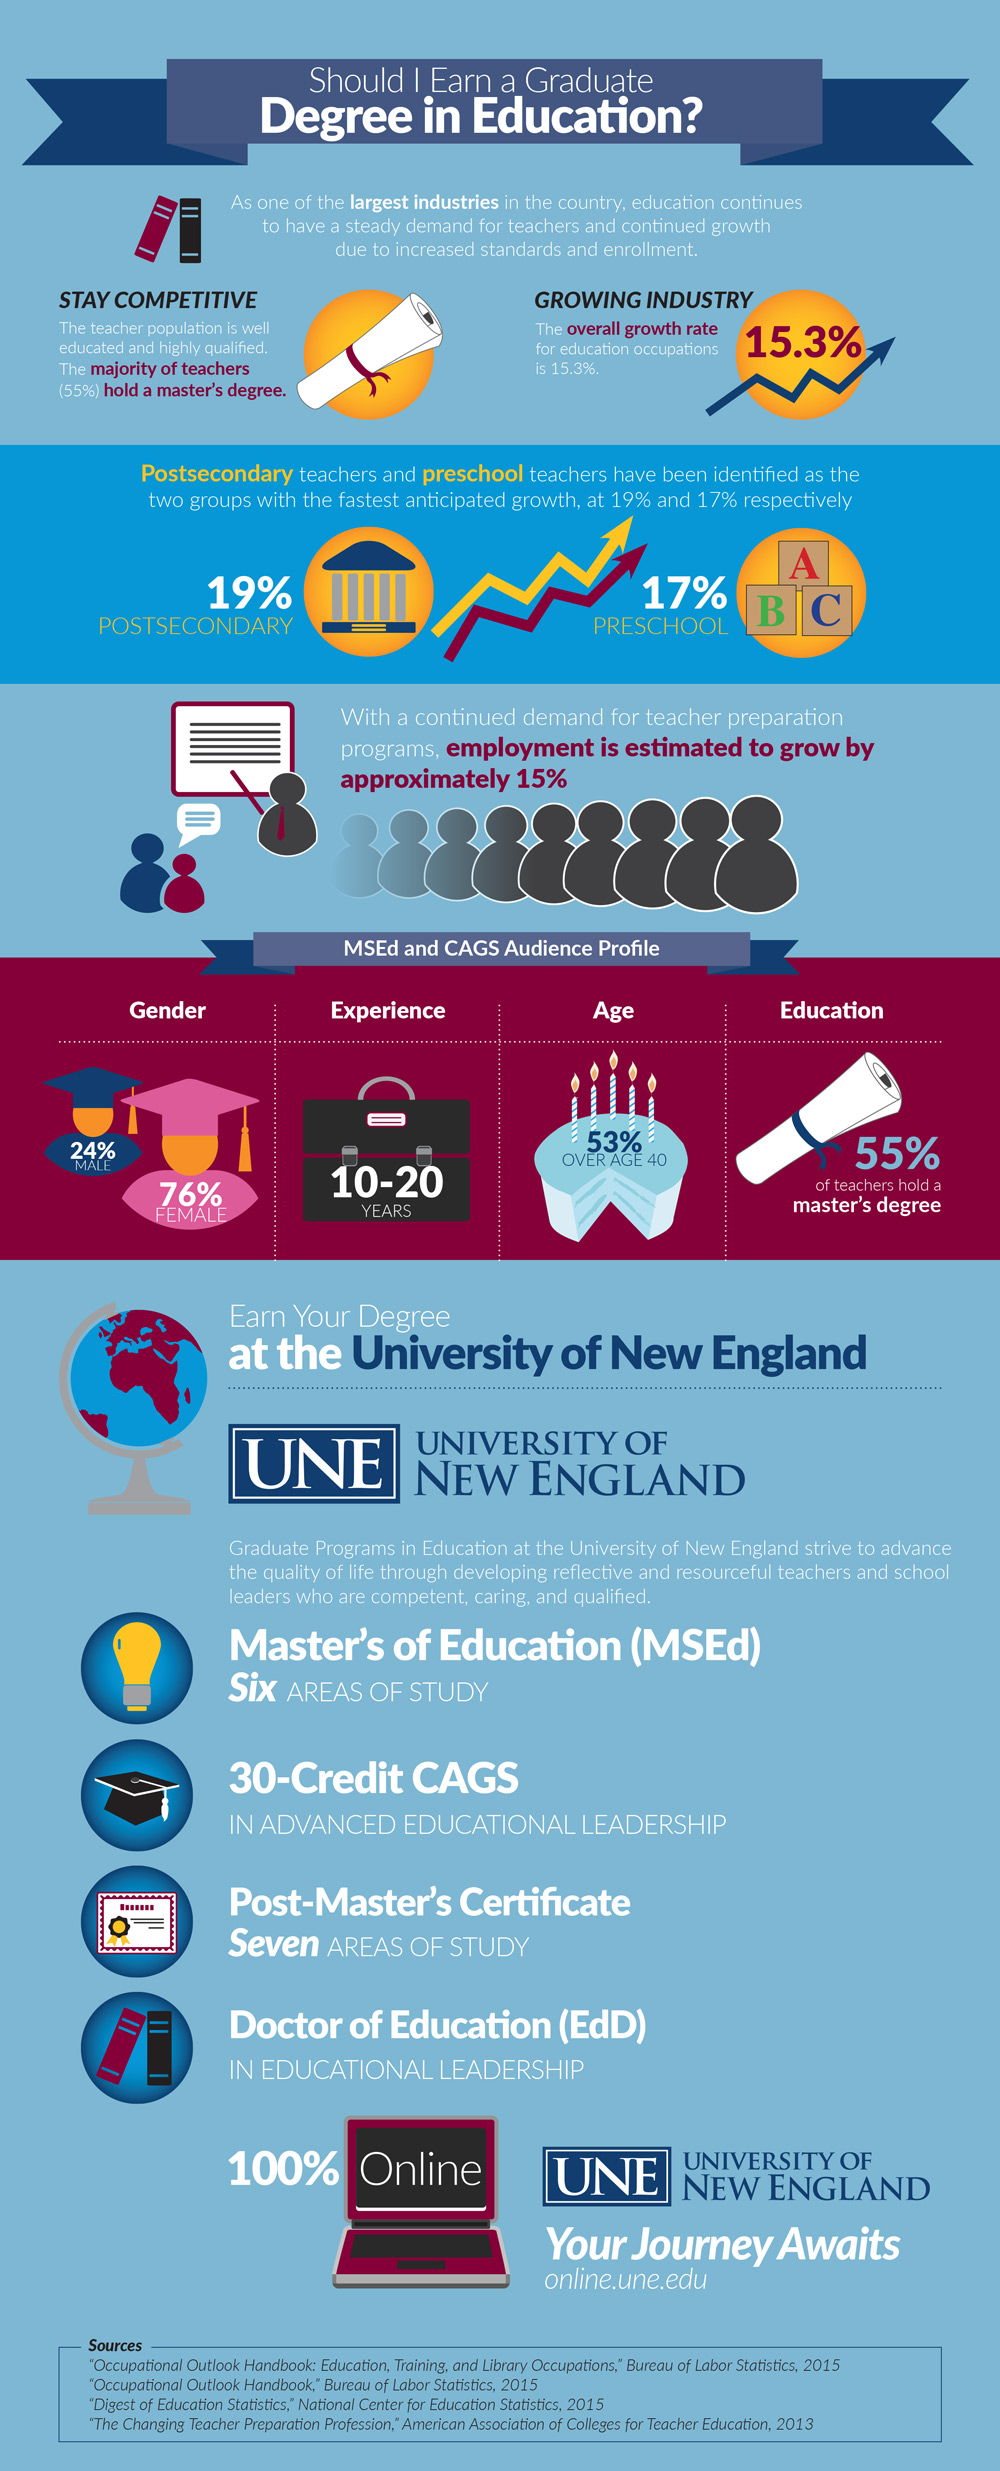 UNE Online Education MSE Infographic